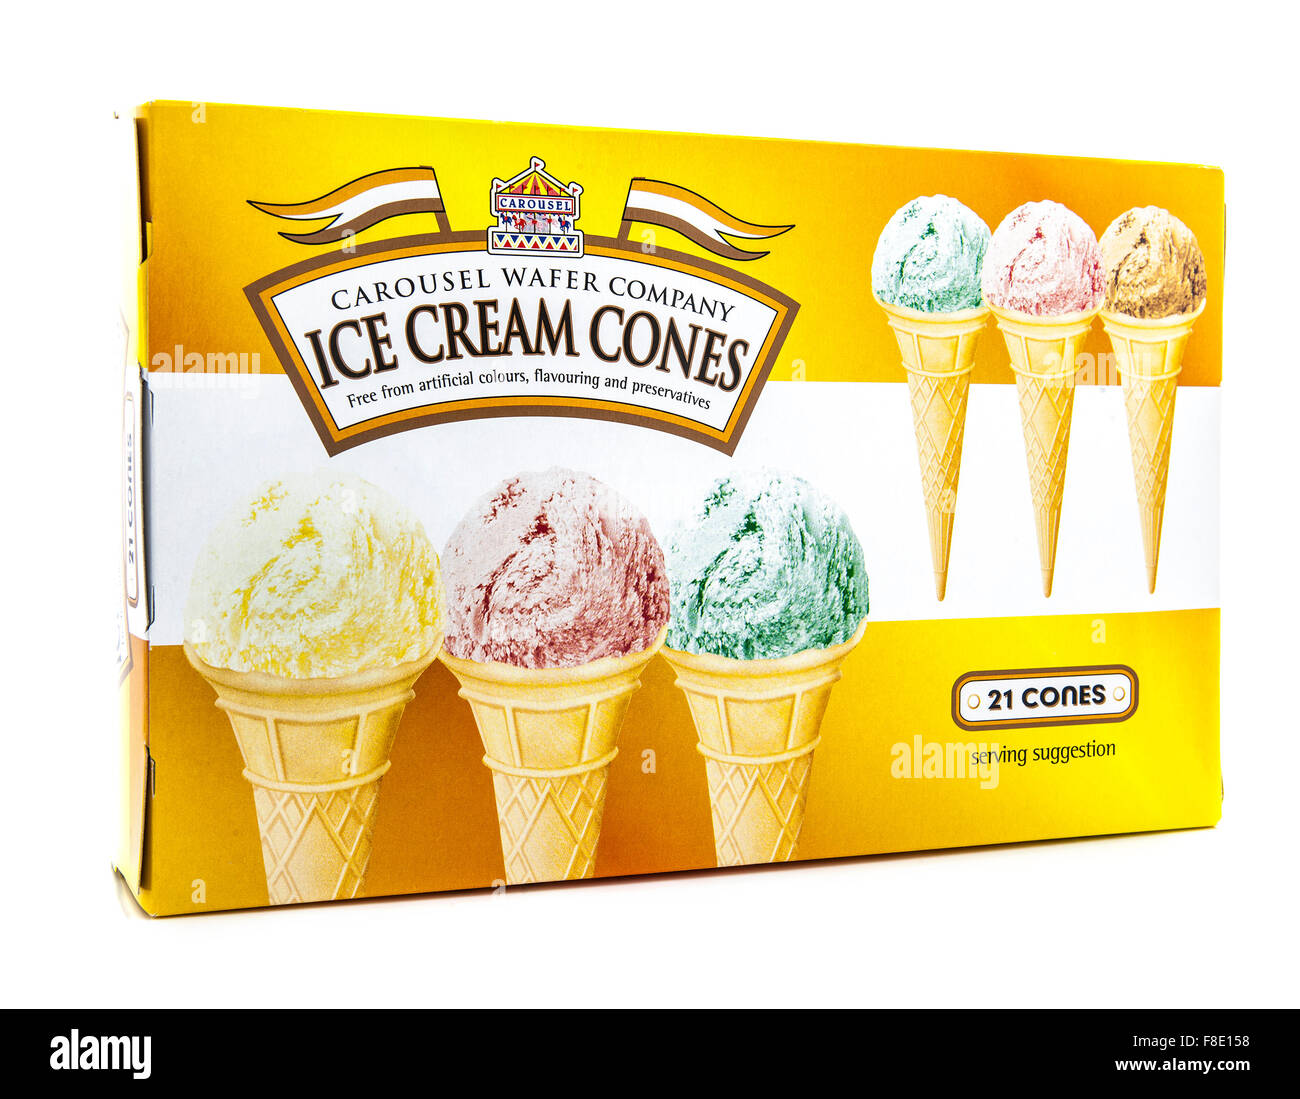 Pack of Carousel Ice Cream Cones on a white background. Stock Photo